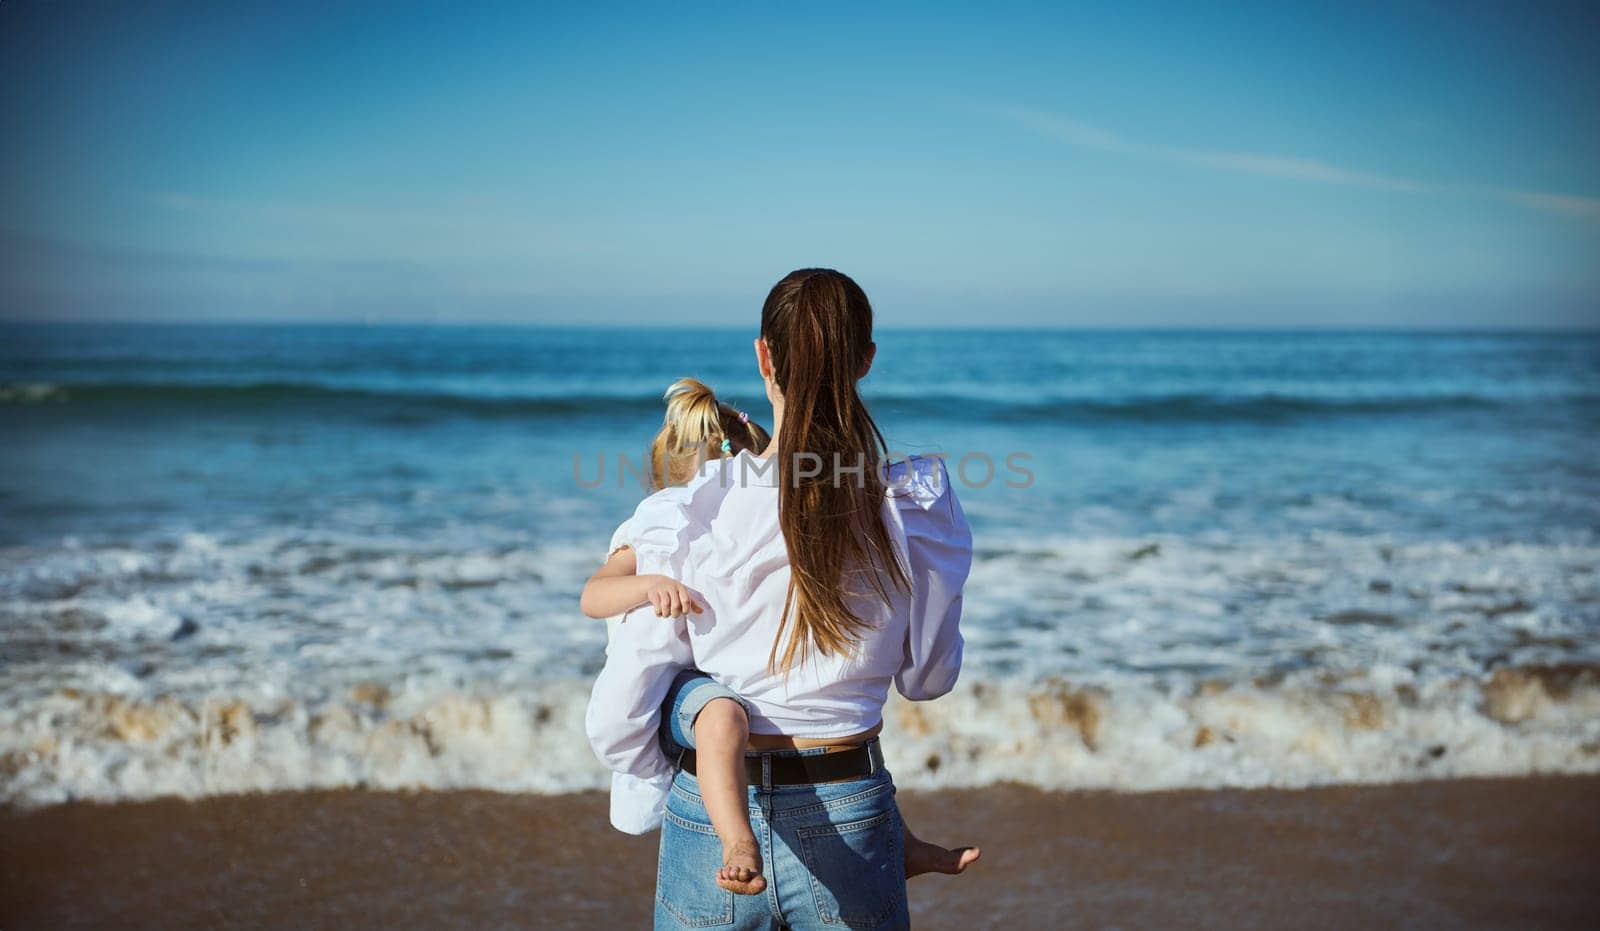 Rear view of a young woman mother carrying her little daughter, enjoying a weekend together, walking along a tropical beach by artgf